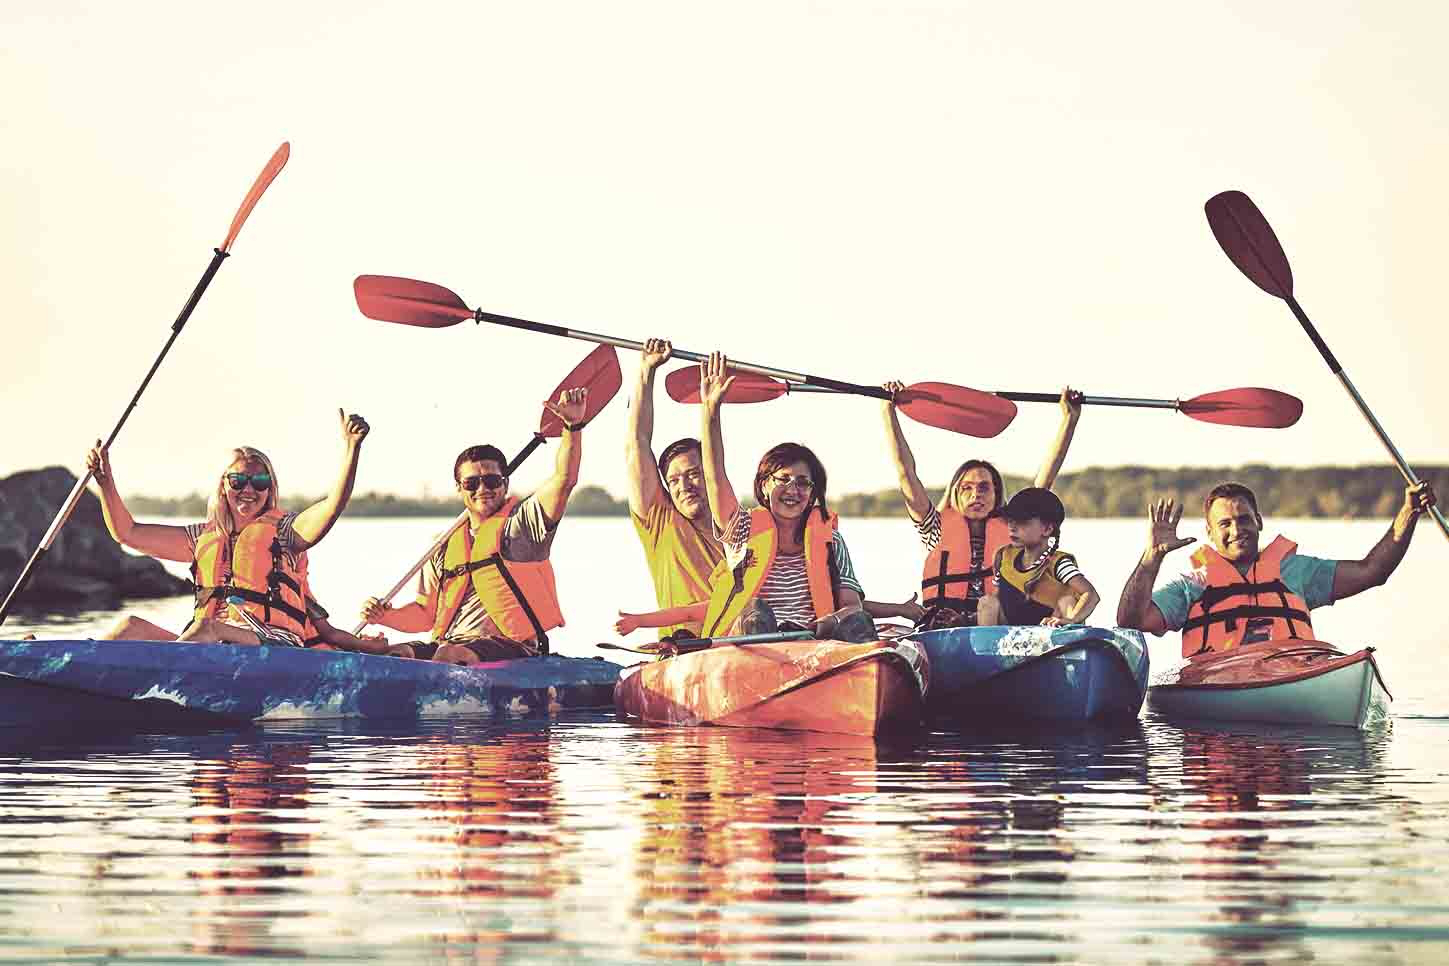 Kayak holidays are brilliant summer activities for the whole family